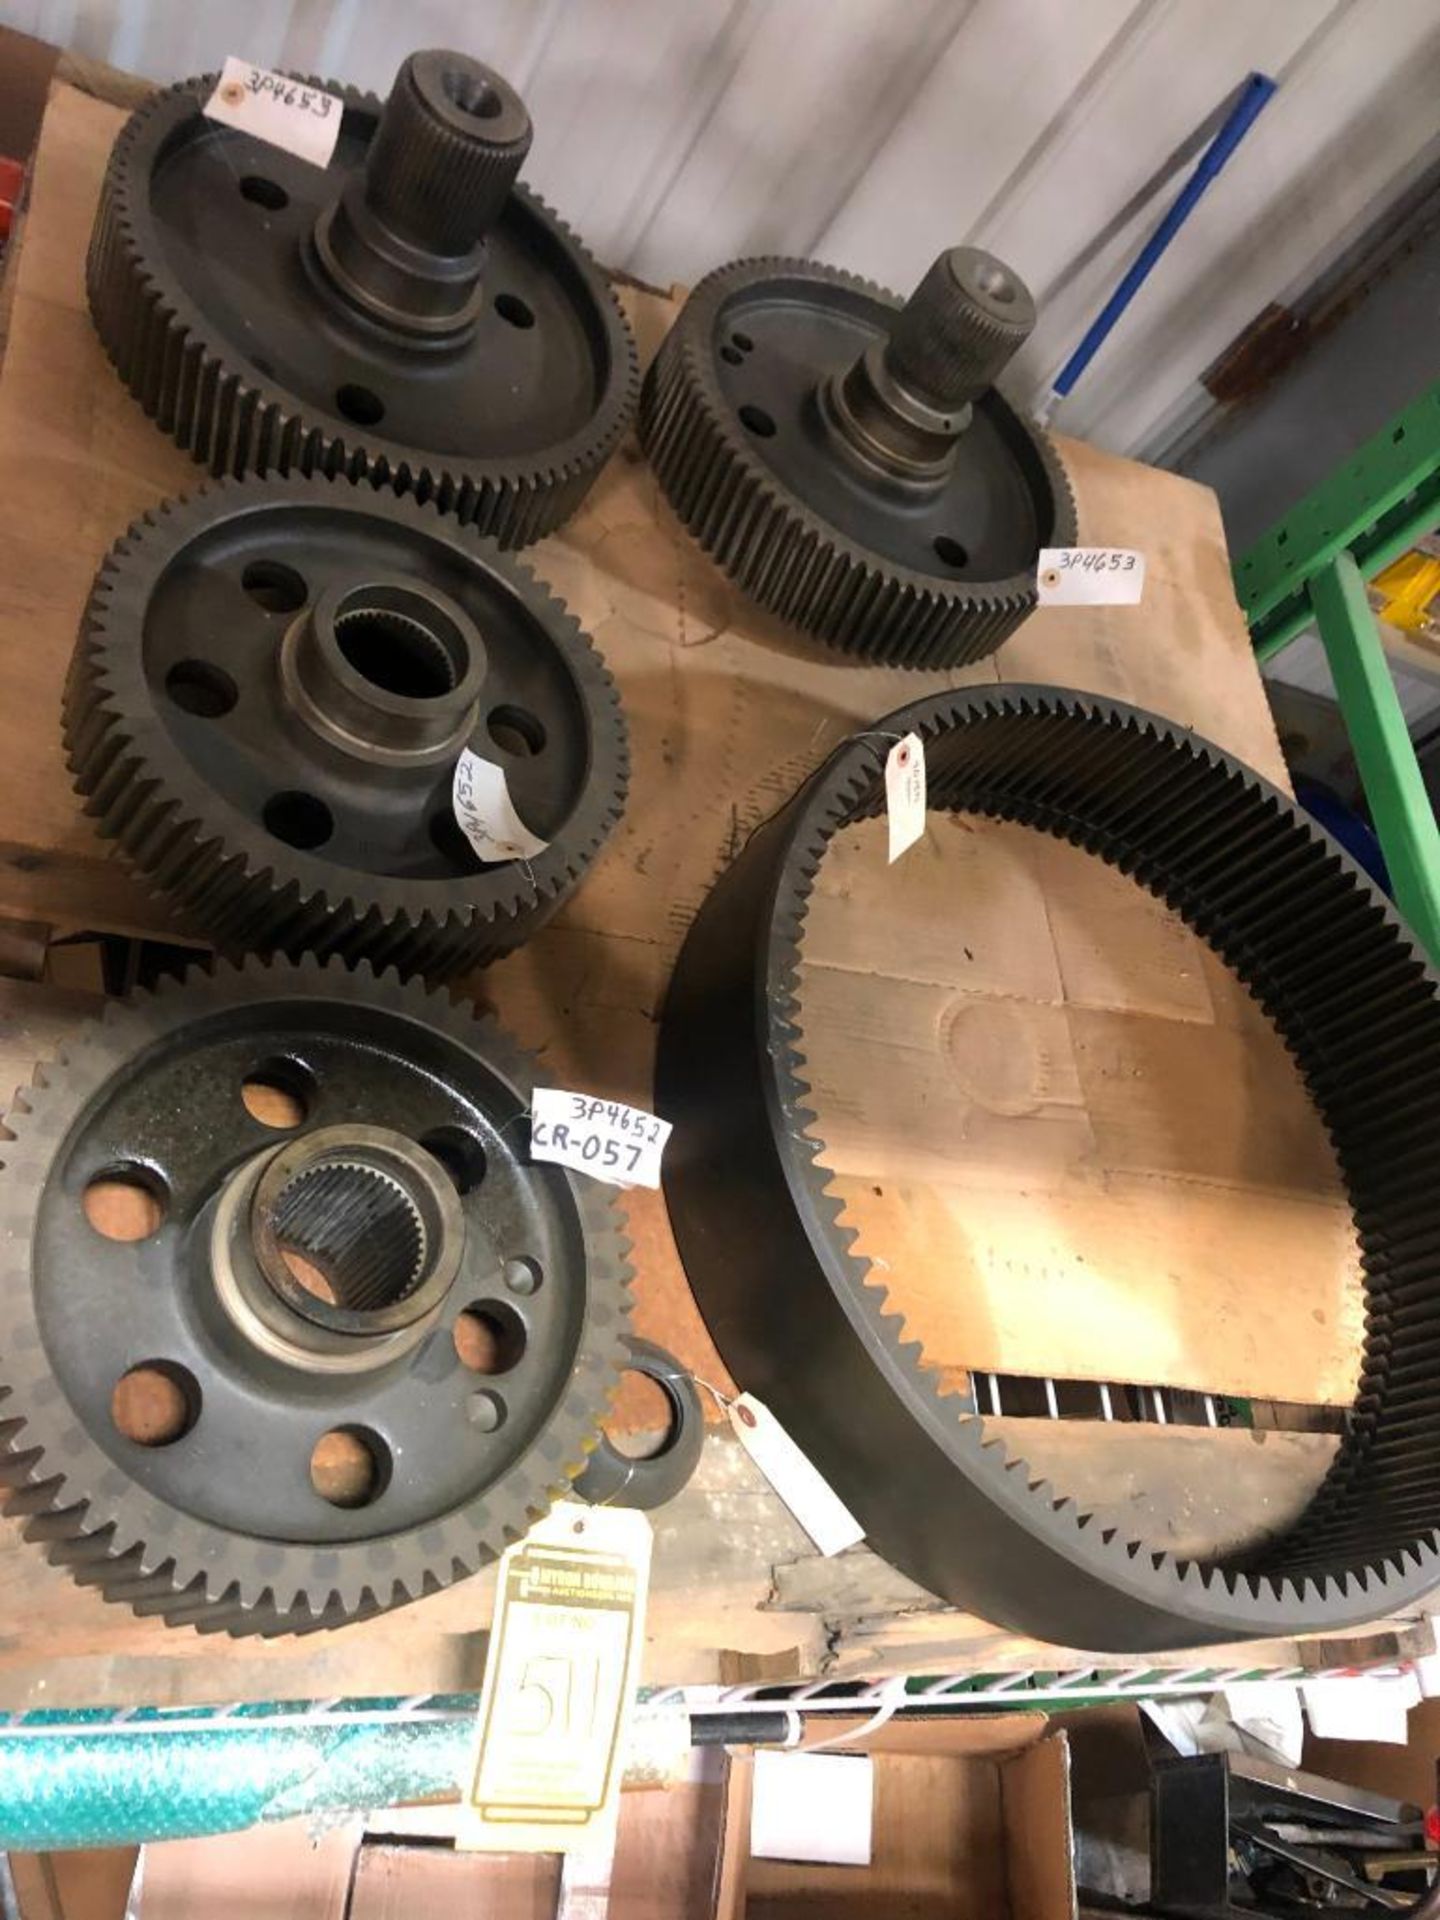 SKID OF ASSORTED PARTS CONSISTING OF: (1) GEAR, PART NUMBER 3P4652, (1) GEAR, PART NUMBER 4D1570, (2